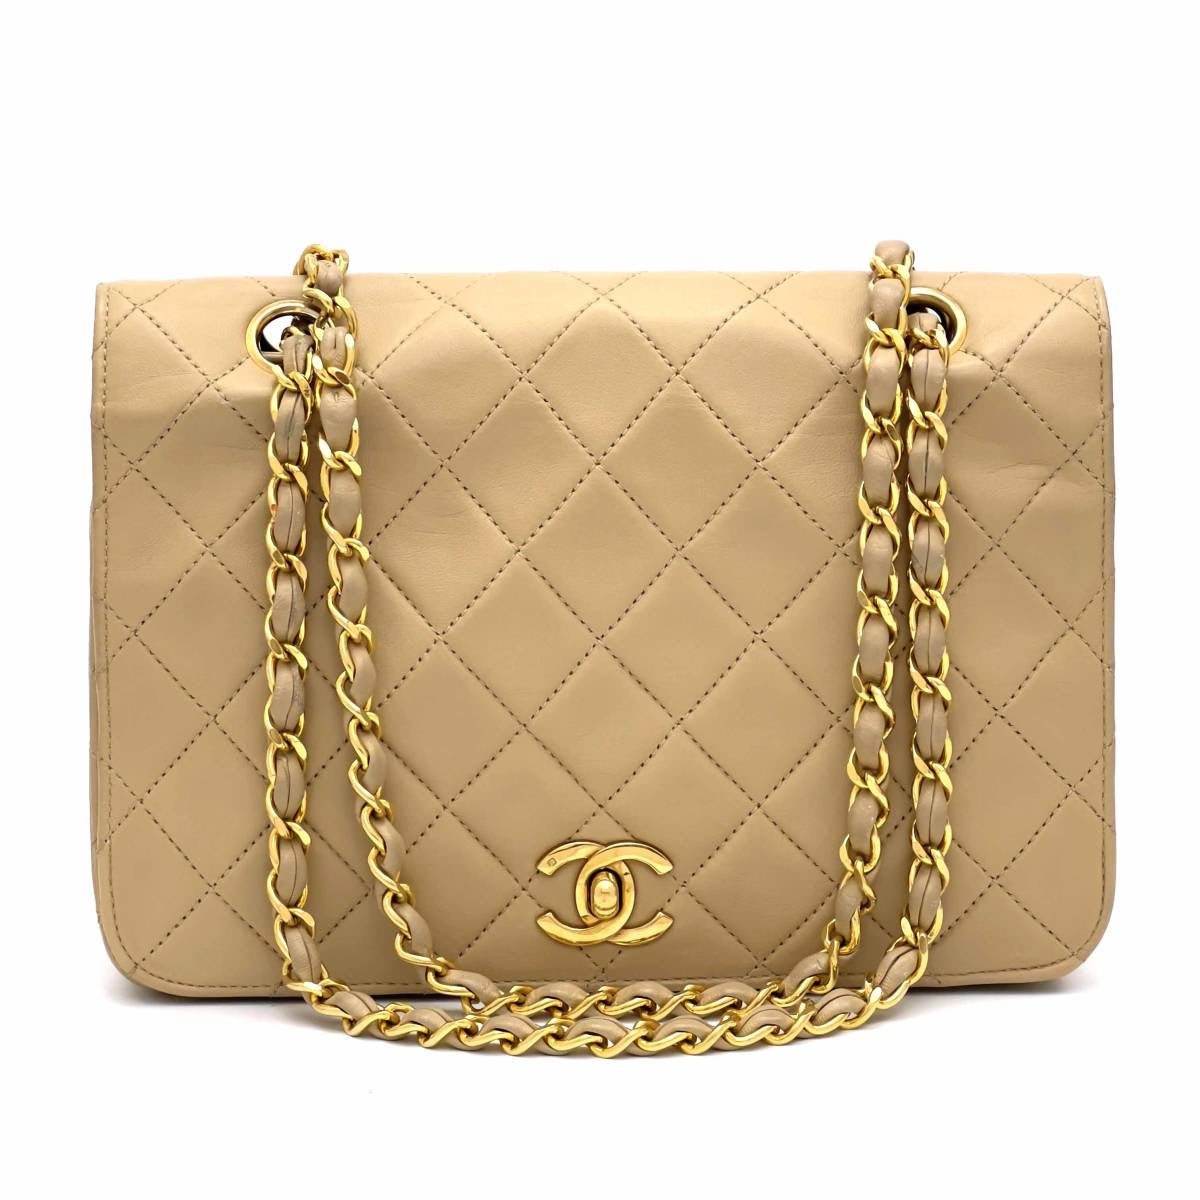 Chanel Vintage Chanel 13 Beige Caviar Leather 3 Compartment Chain